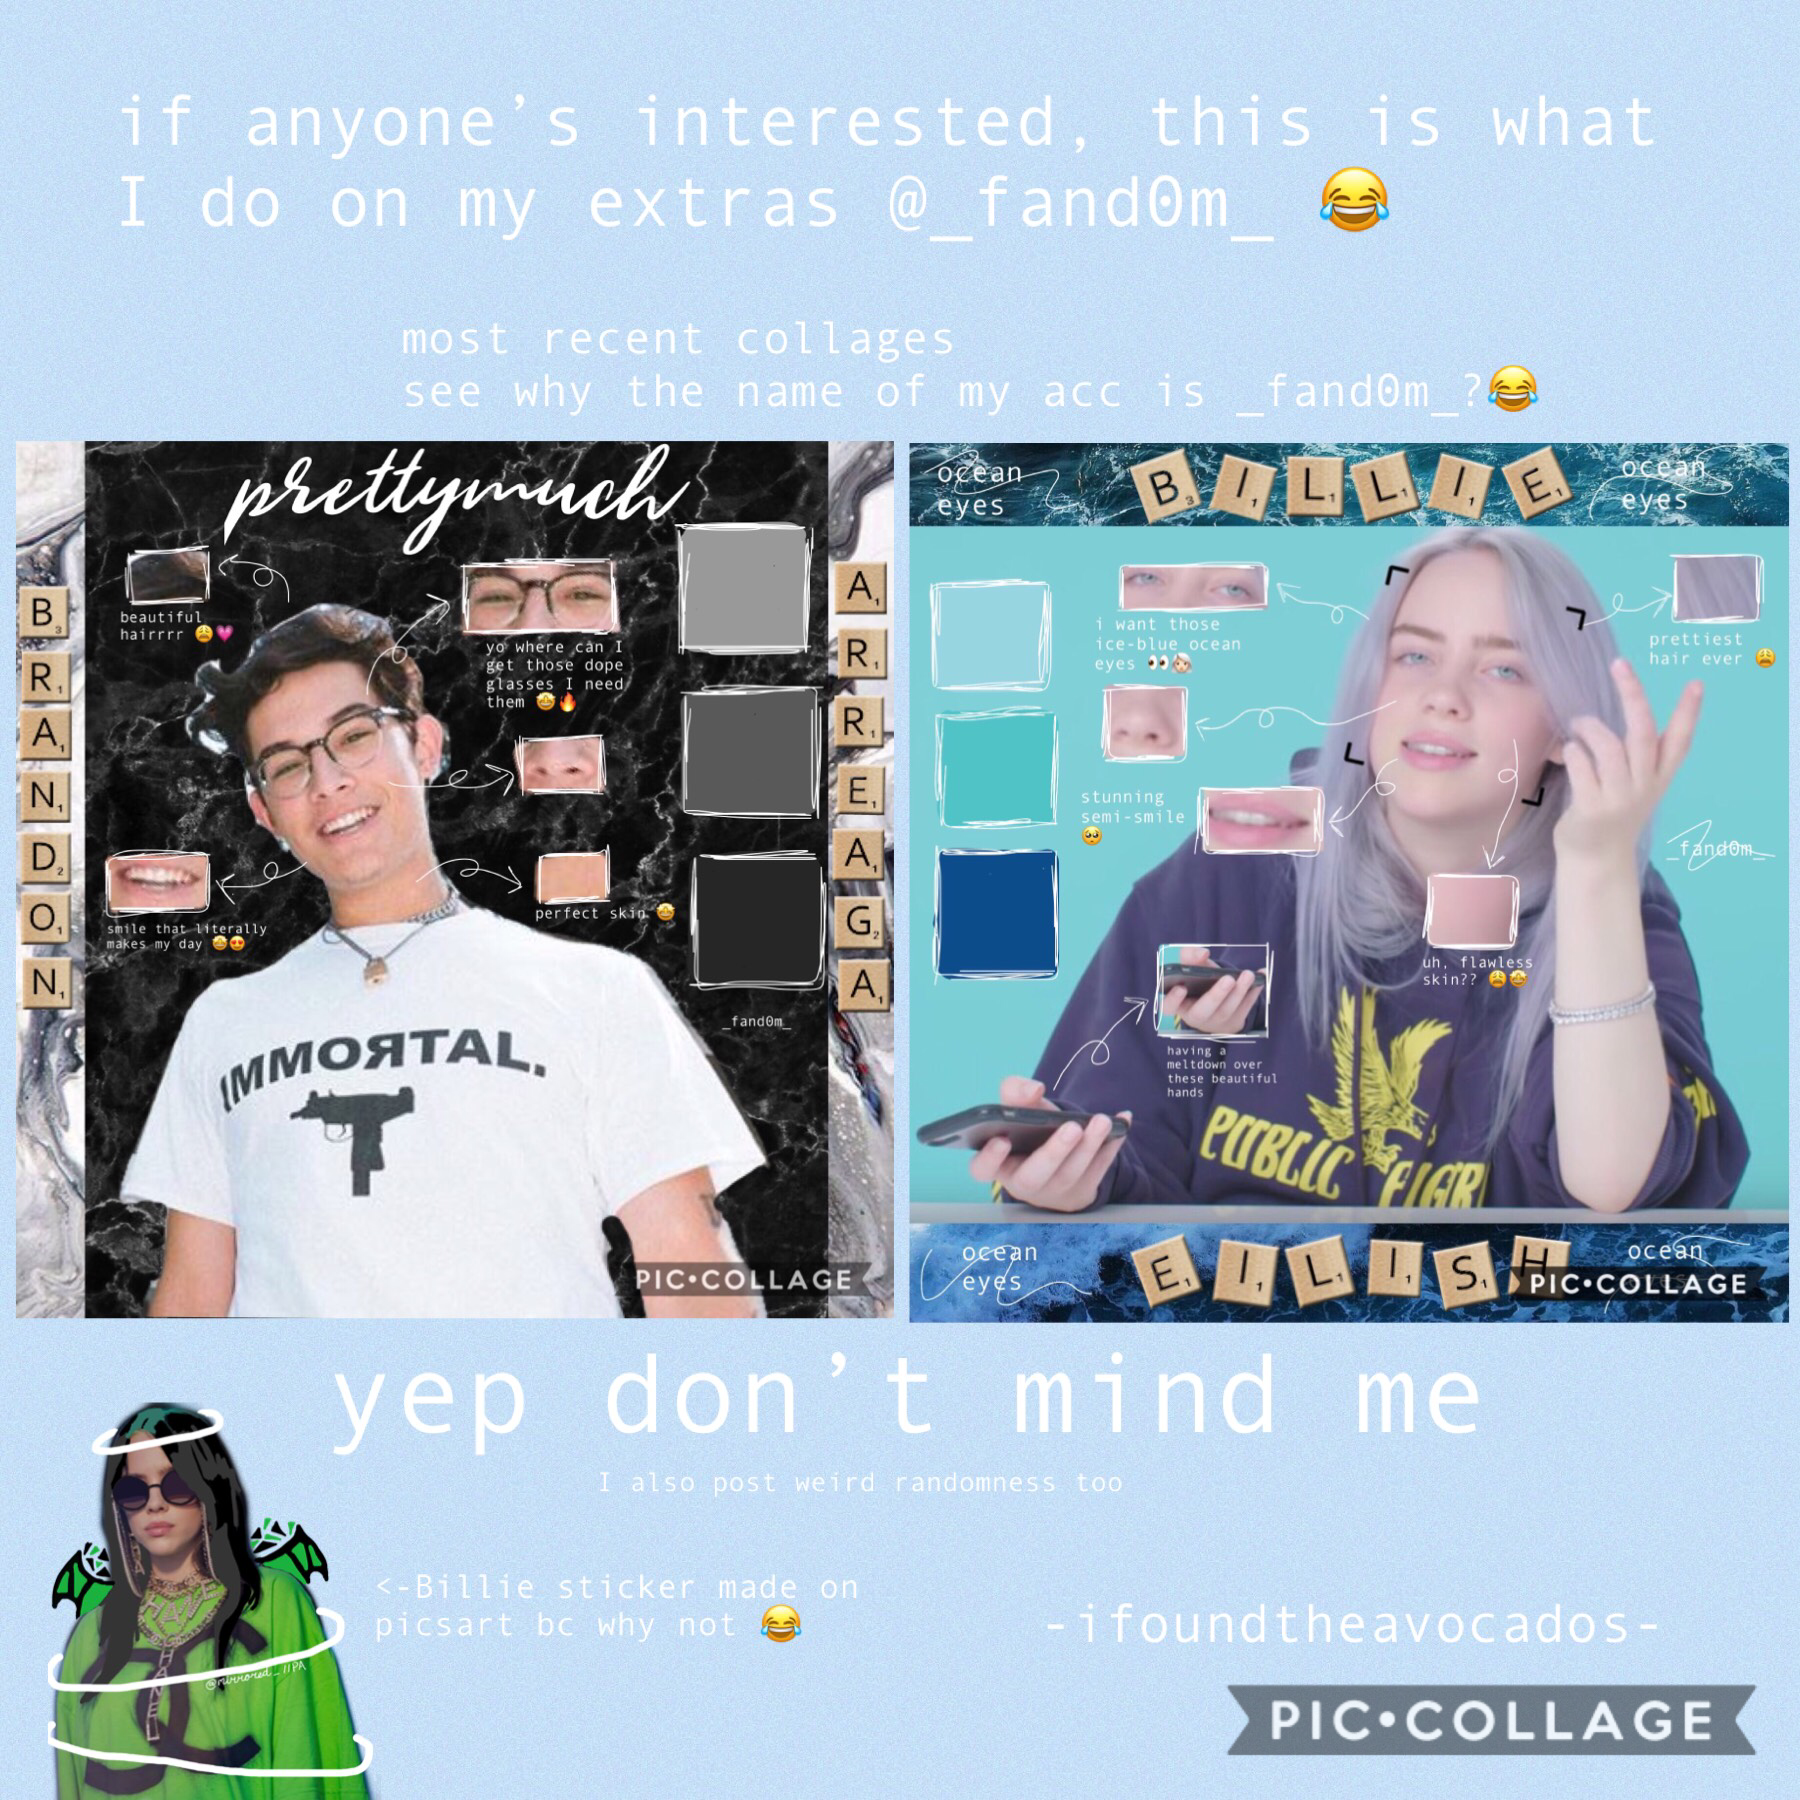 if anyone’s interested 😂 join my weirdness (tappy)
this is random but I love that Billie pic and idk why I haven’t seen it before today smhhh. also yEaH that’s BRaNdOn aRReaGa 🥺🤩 ok ok I’ll stop before I say anything ridiculous 😂